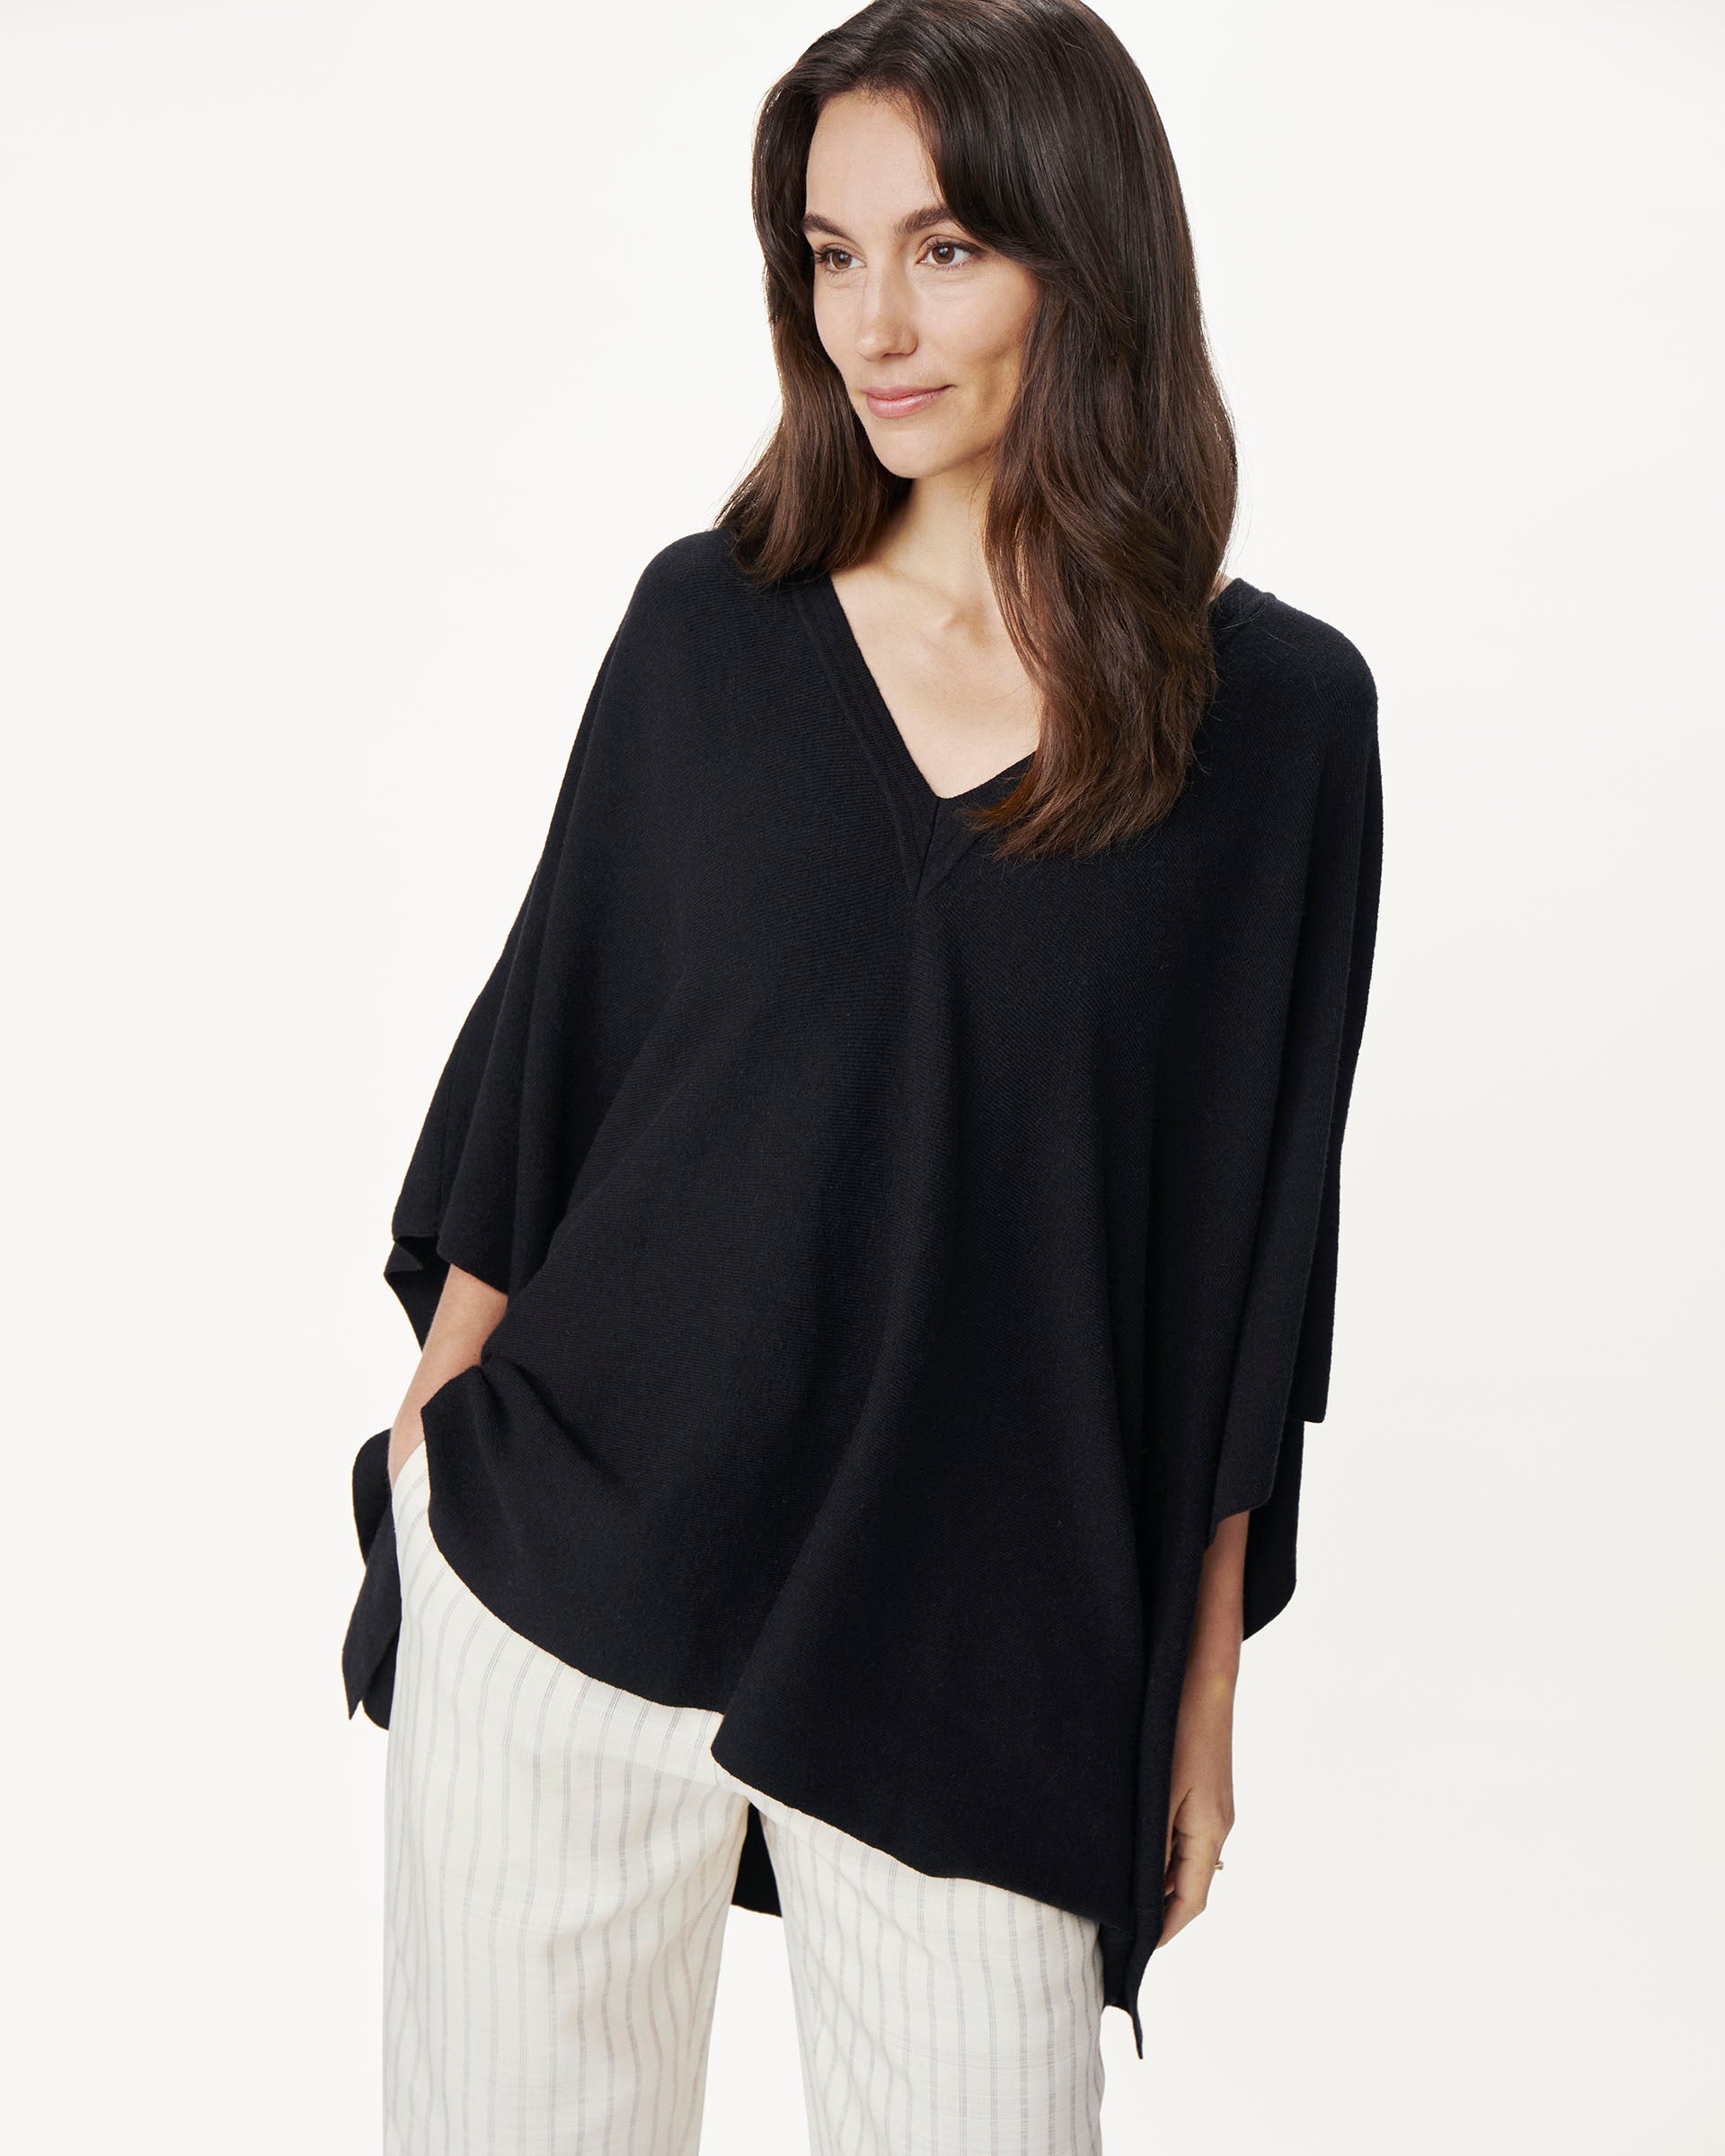 female wearing black v neck poncho with white pants on a white background